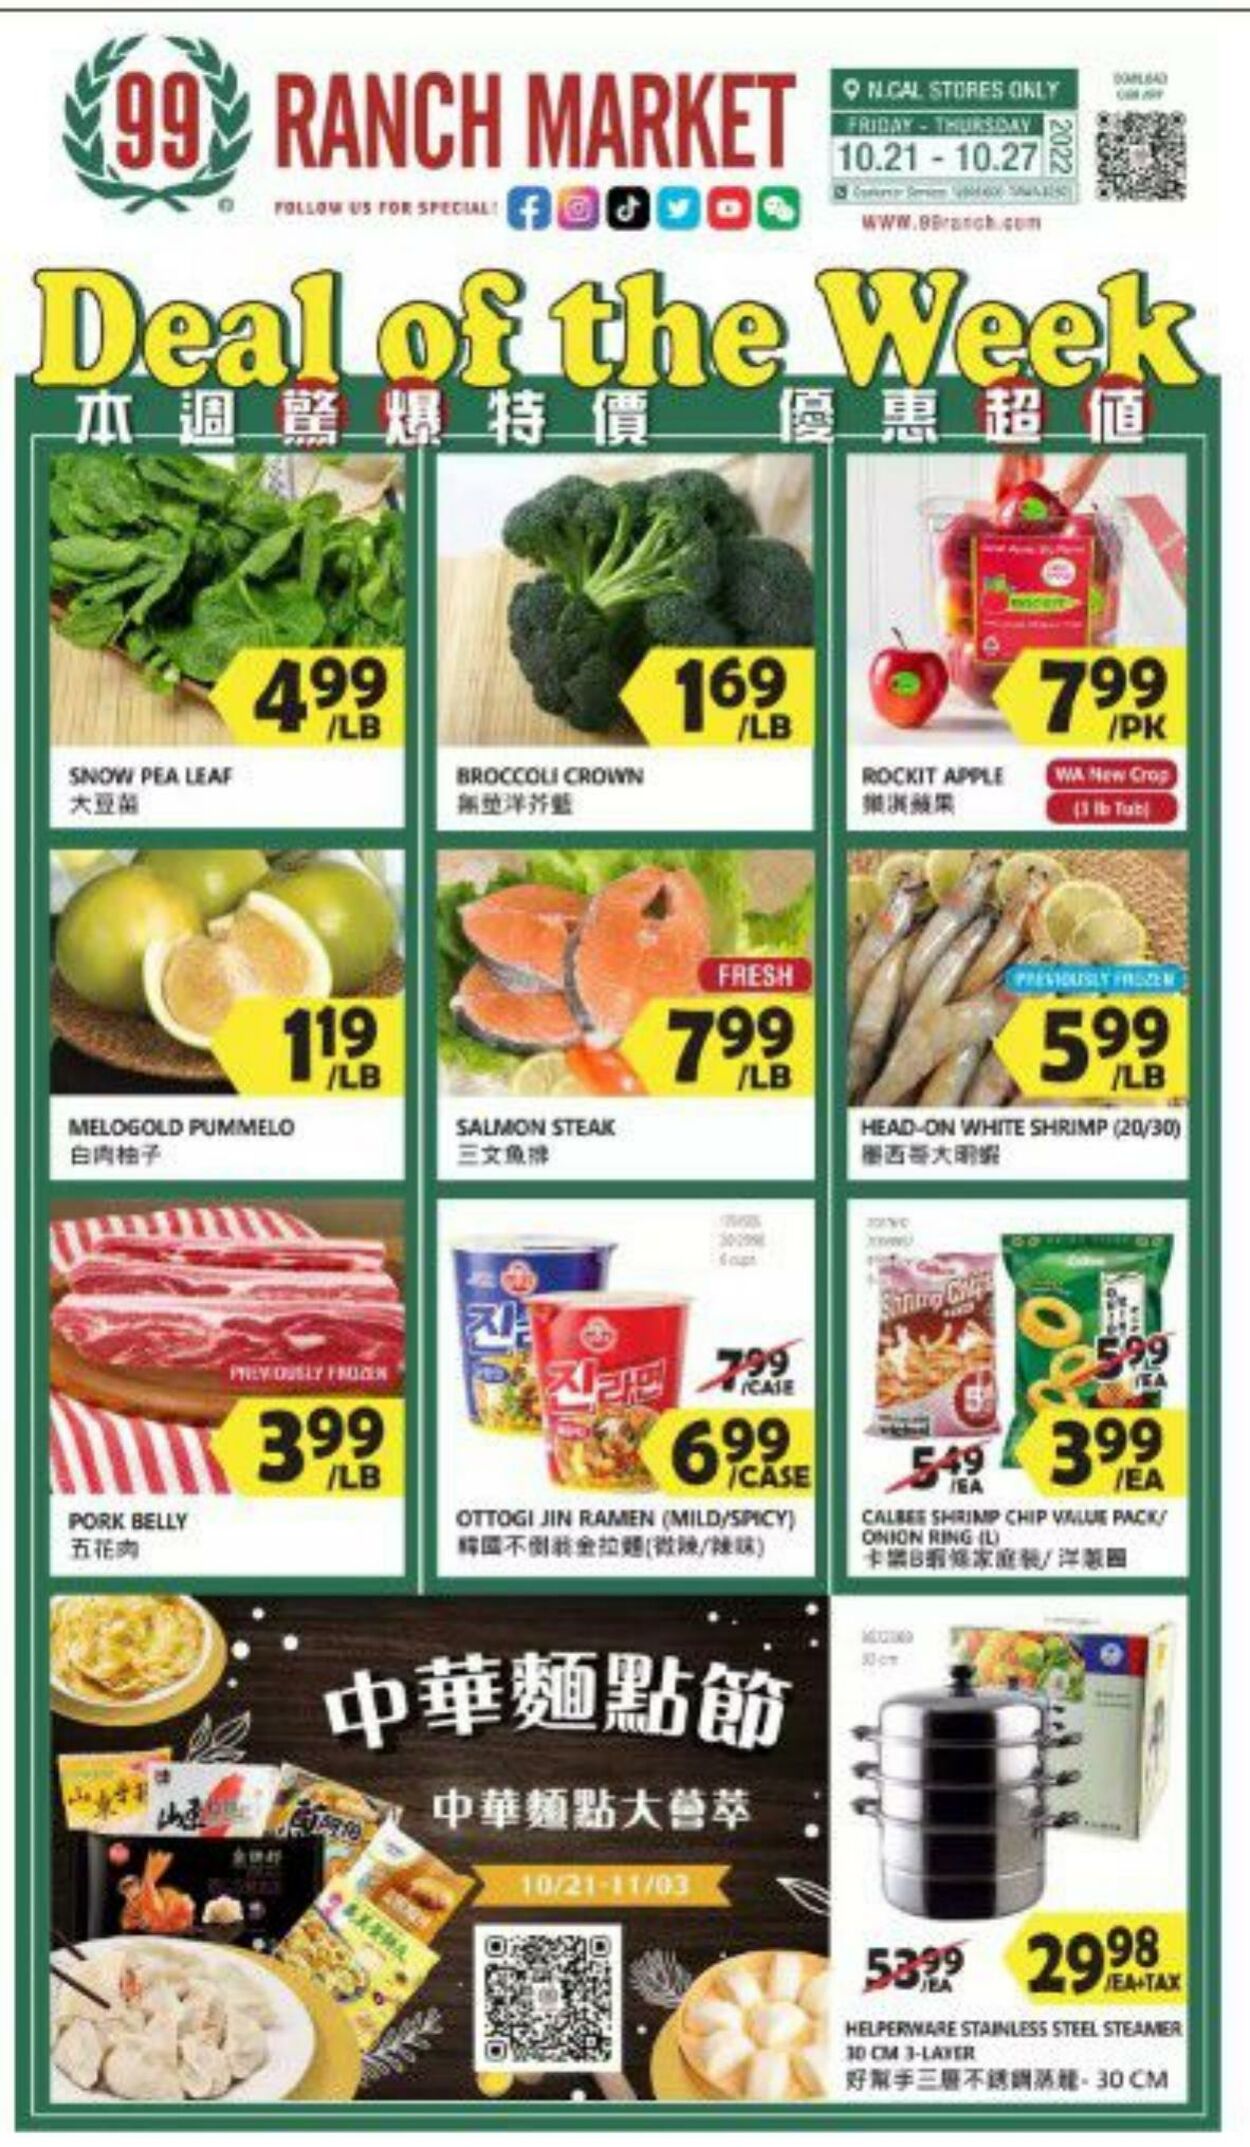 99 Ranch Market Current weekly ad 10/27 Weekly Ads, Promotions